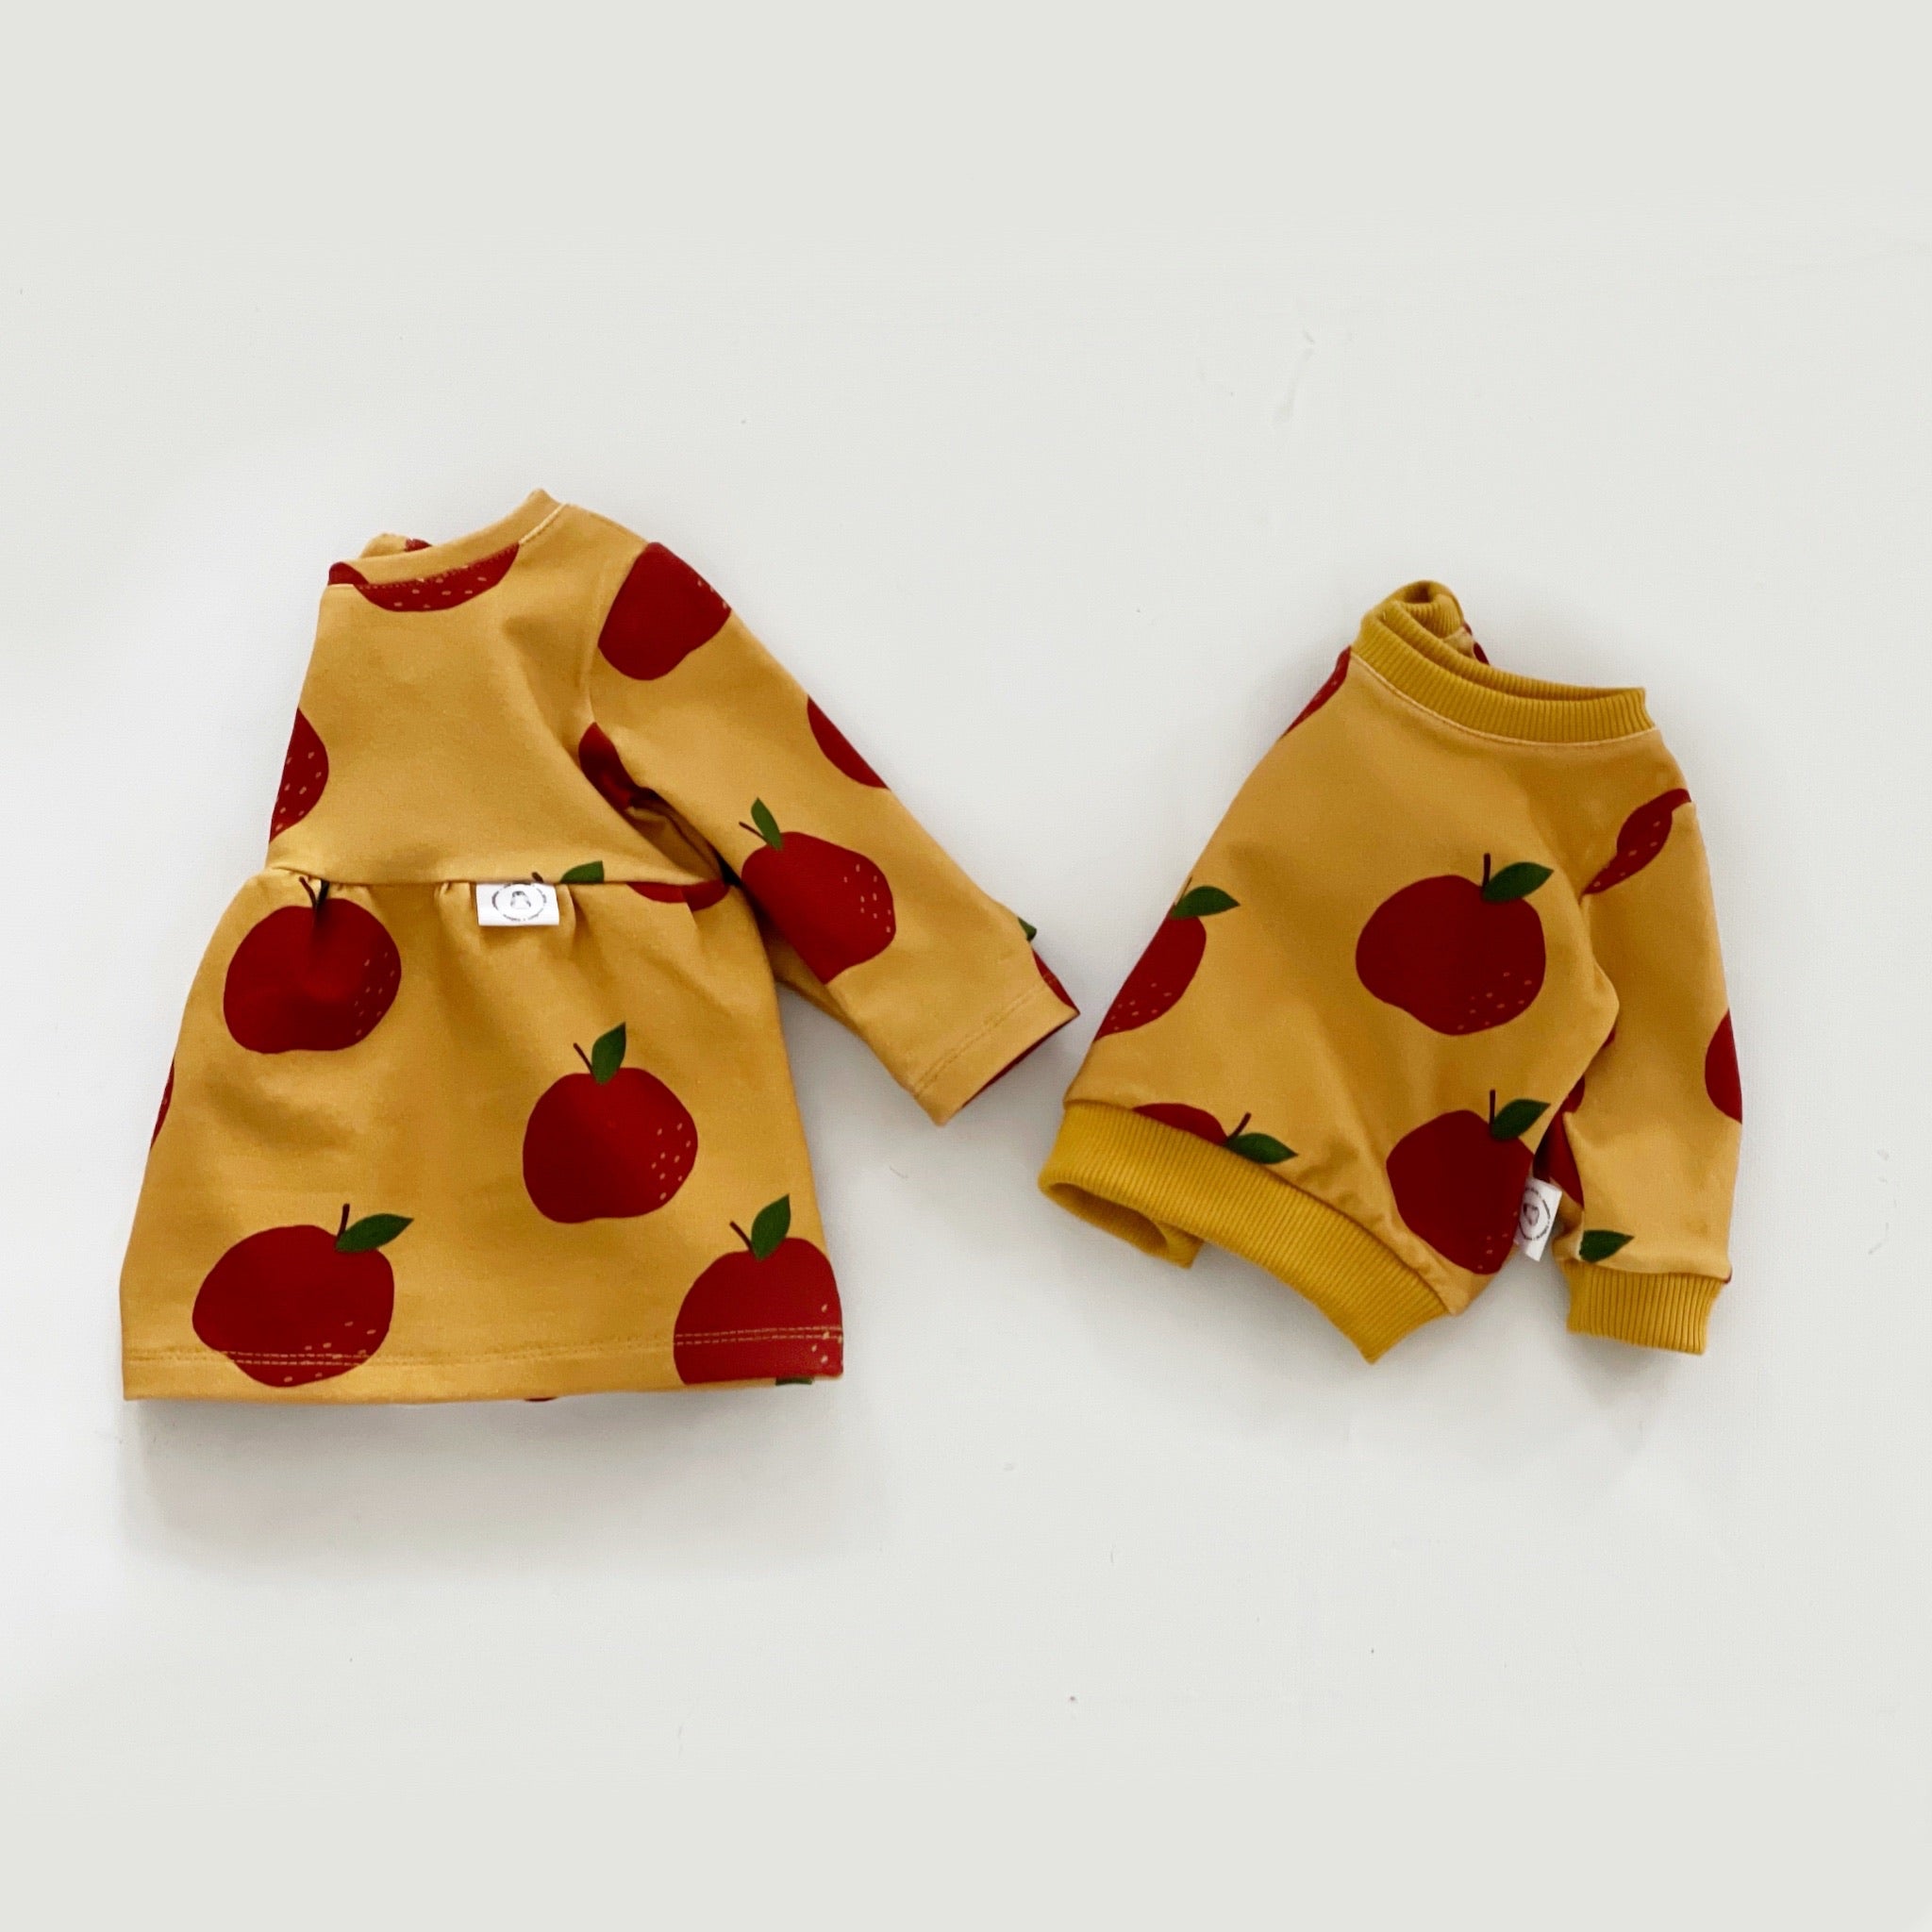 “Zoe” dress with Apples